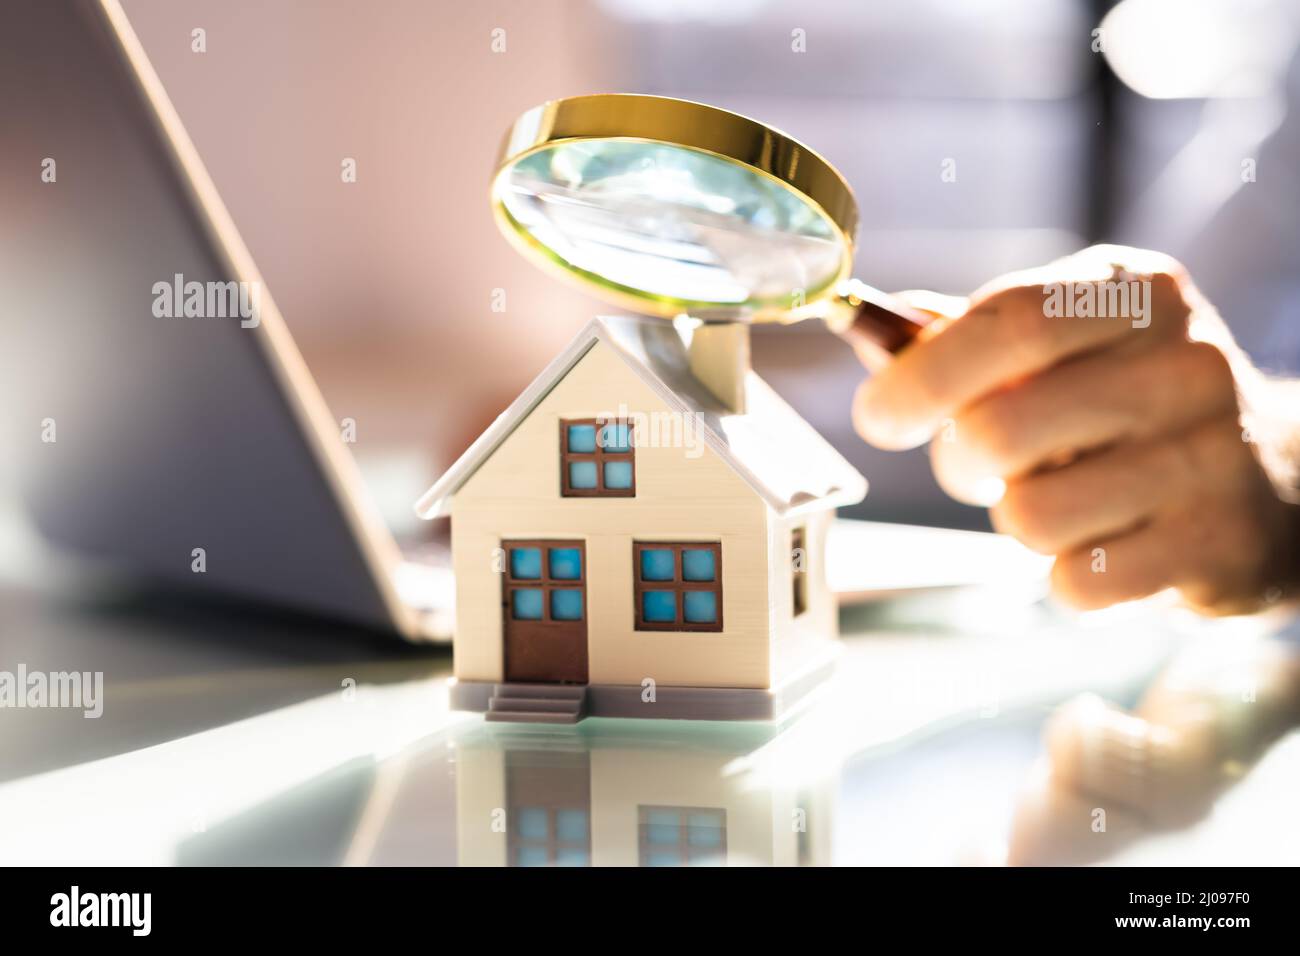 Real Estate House Inspector Checking Property Using Magnifying Glass Stock Photo